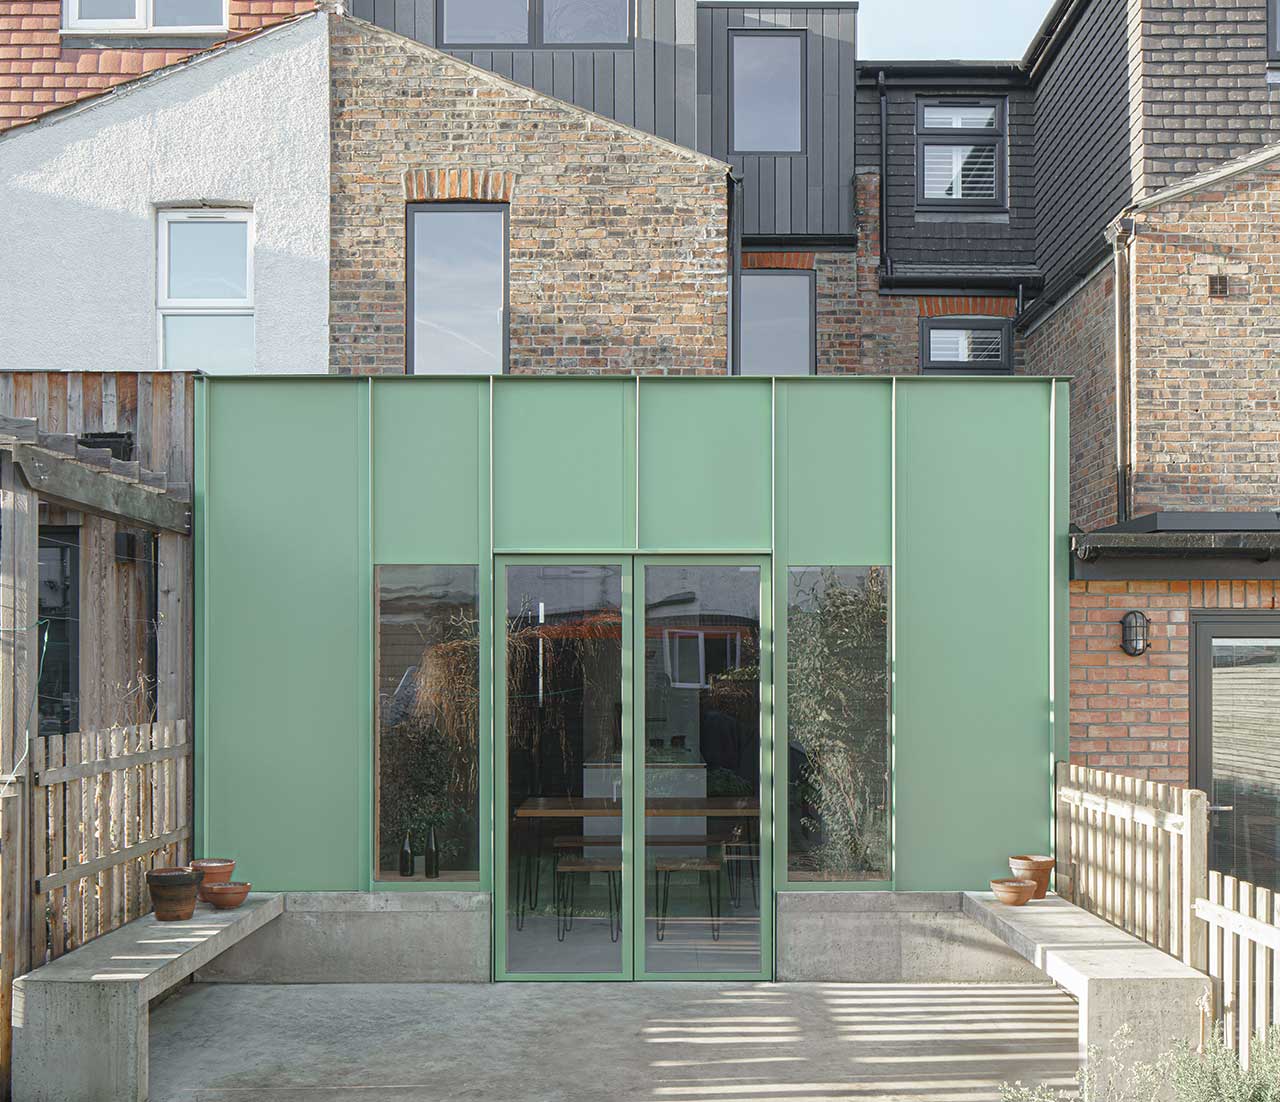 DEDRAFT Adds a Green Extension To Renovated London Home